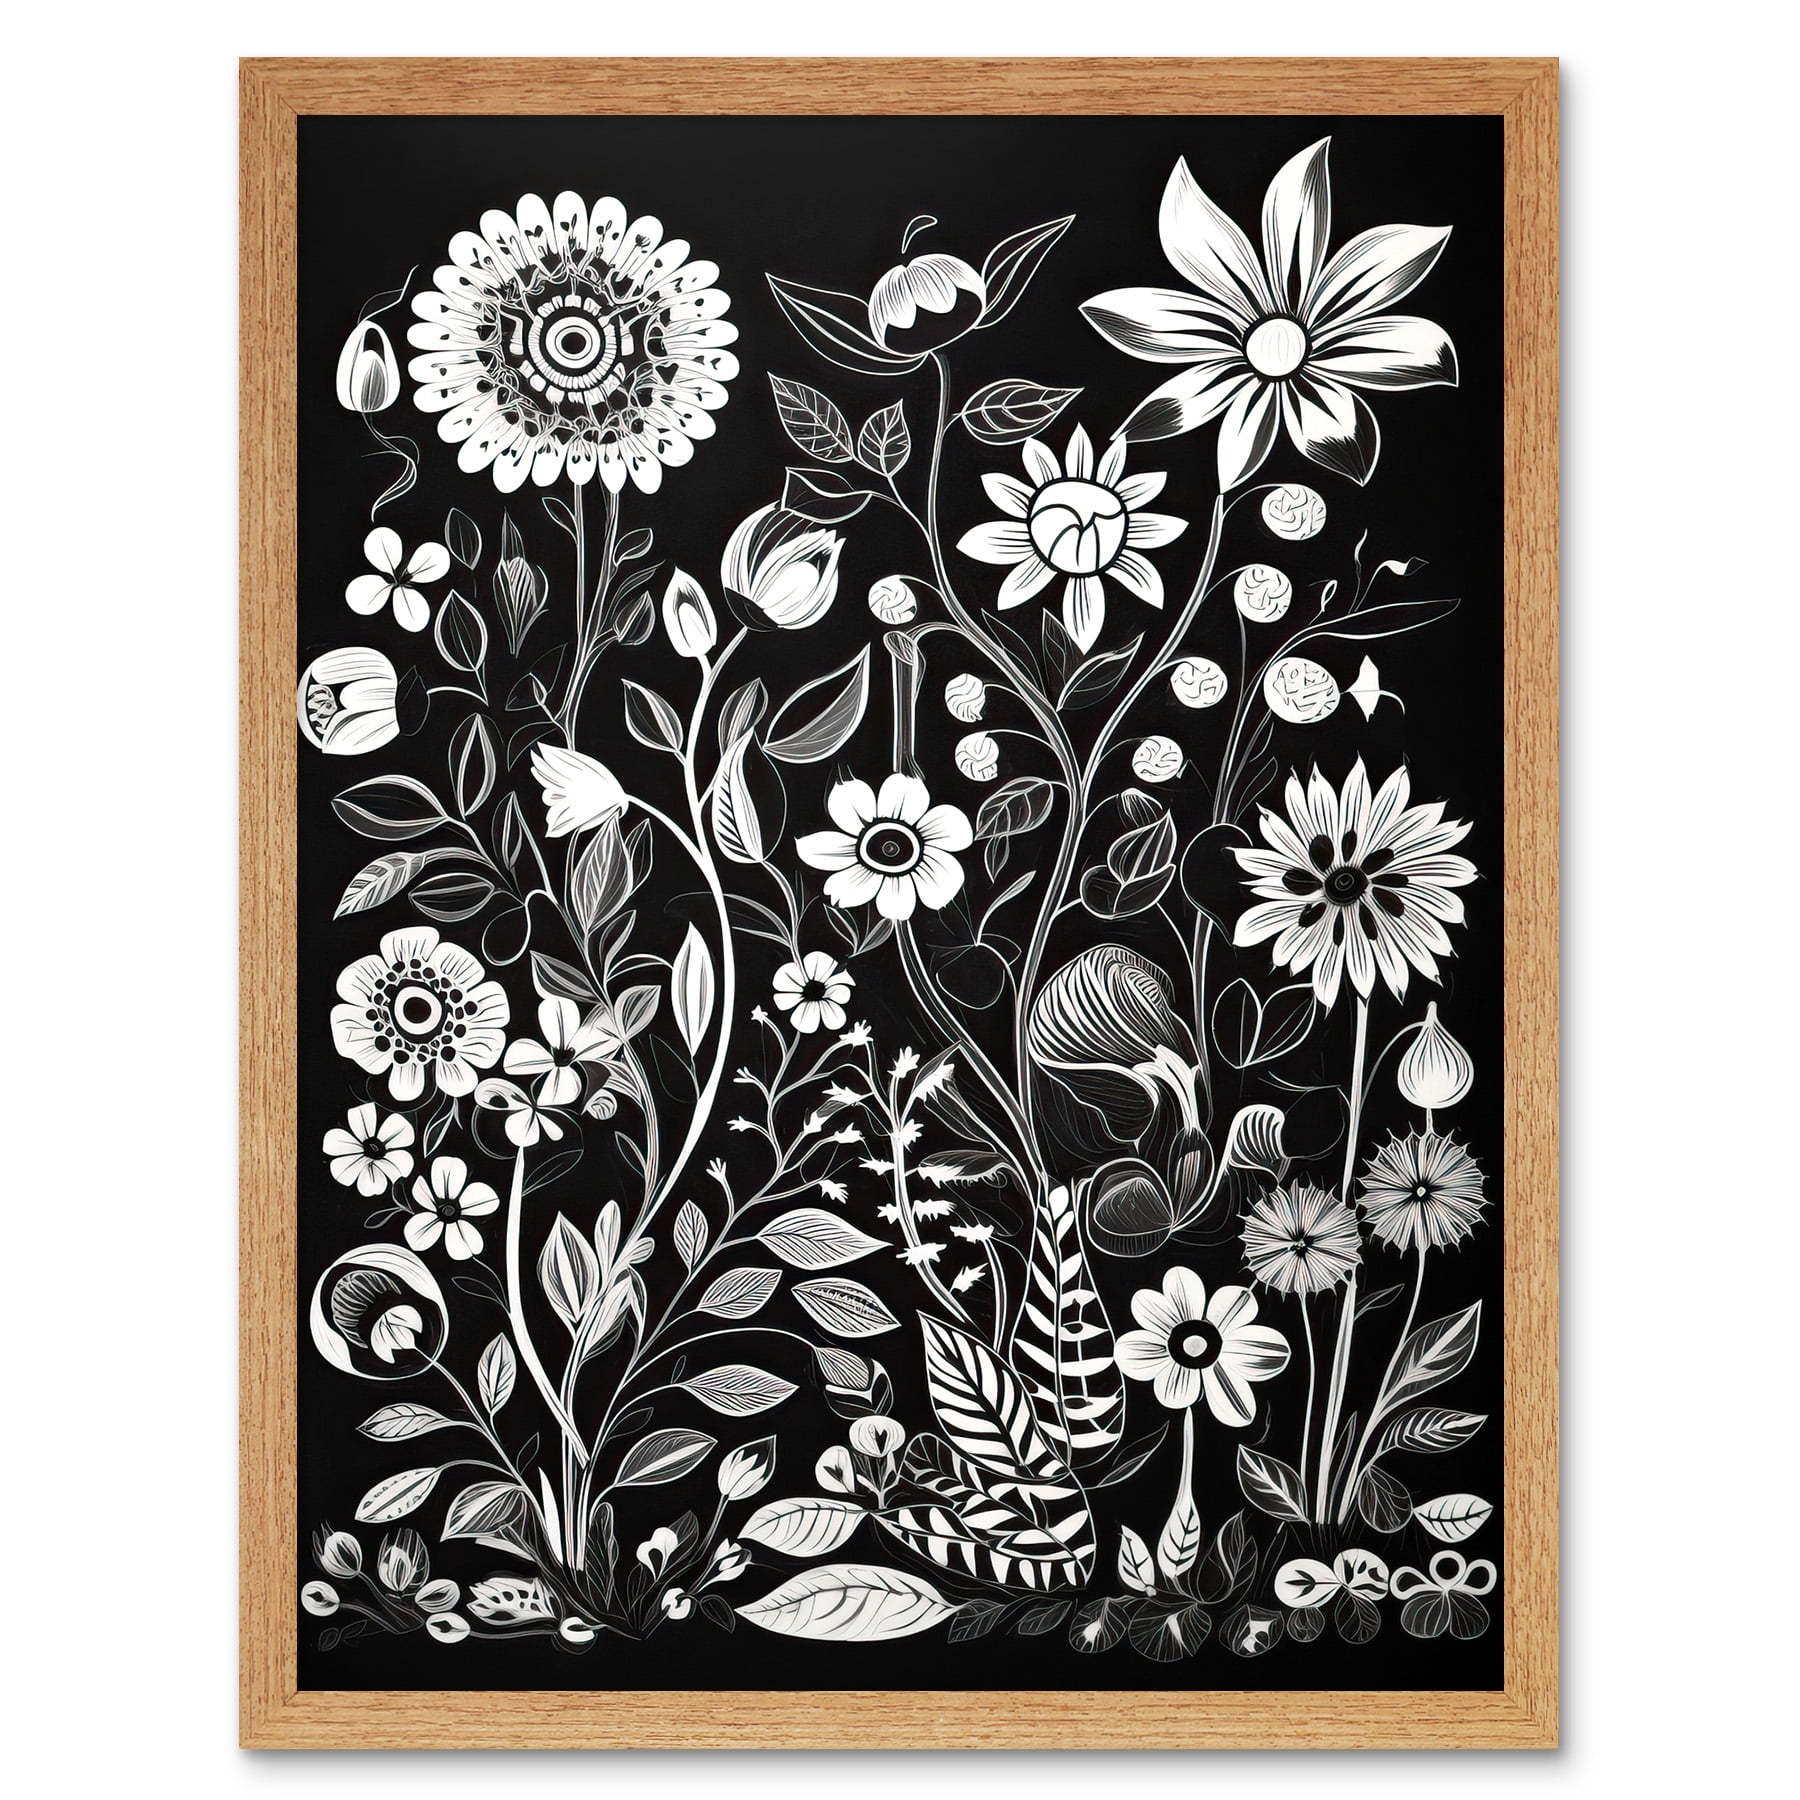 Black and White Wild Flower Contour Pattern Art Print Framed Poster Wall  Decor 12x16 inch